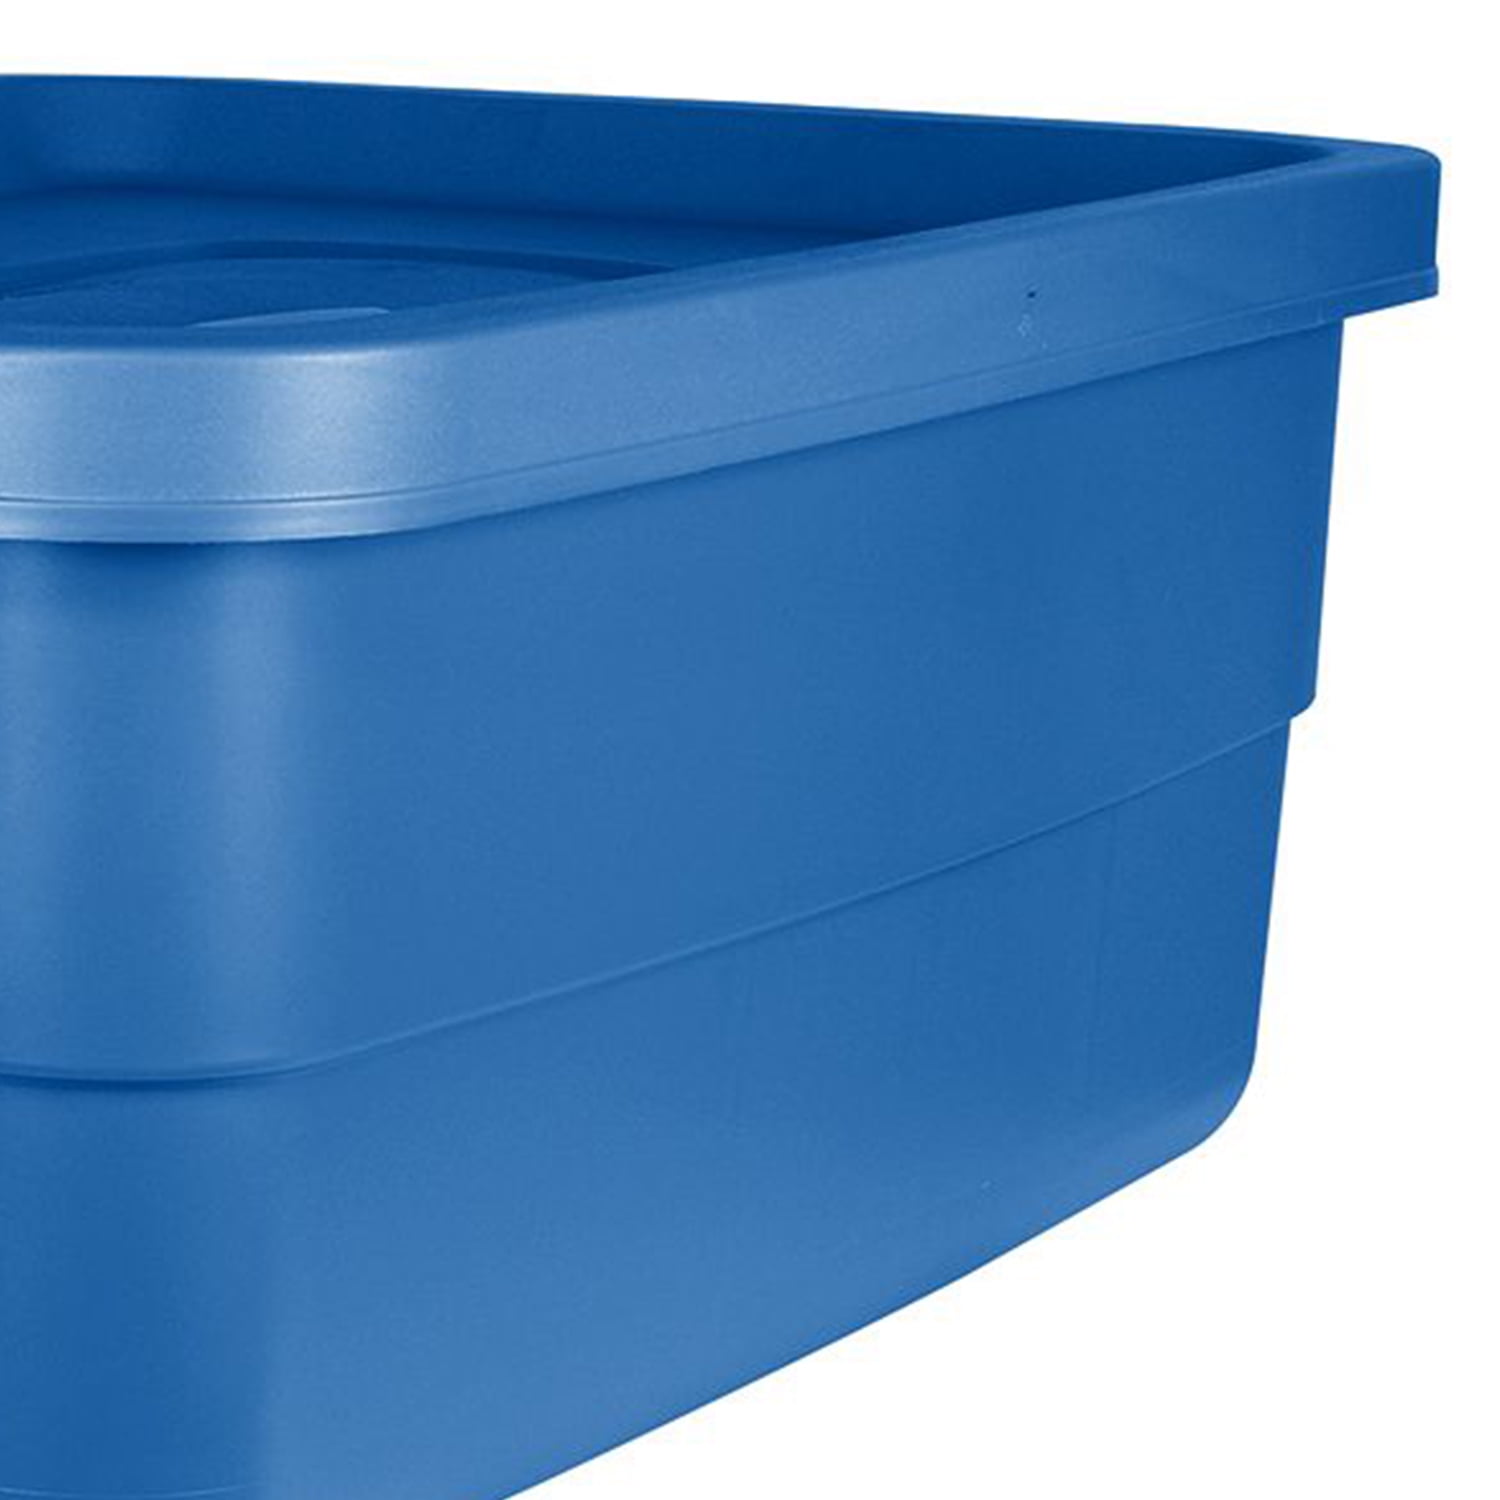 Rubbermaid Rough Neck Rugged Tote STORAGE BOX CONTAINER Blue, 18-Gallon 4 ct